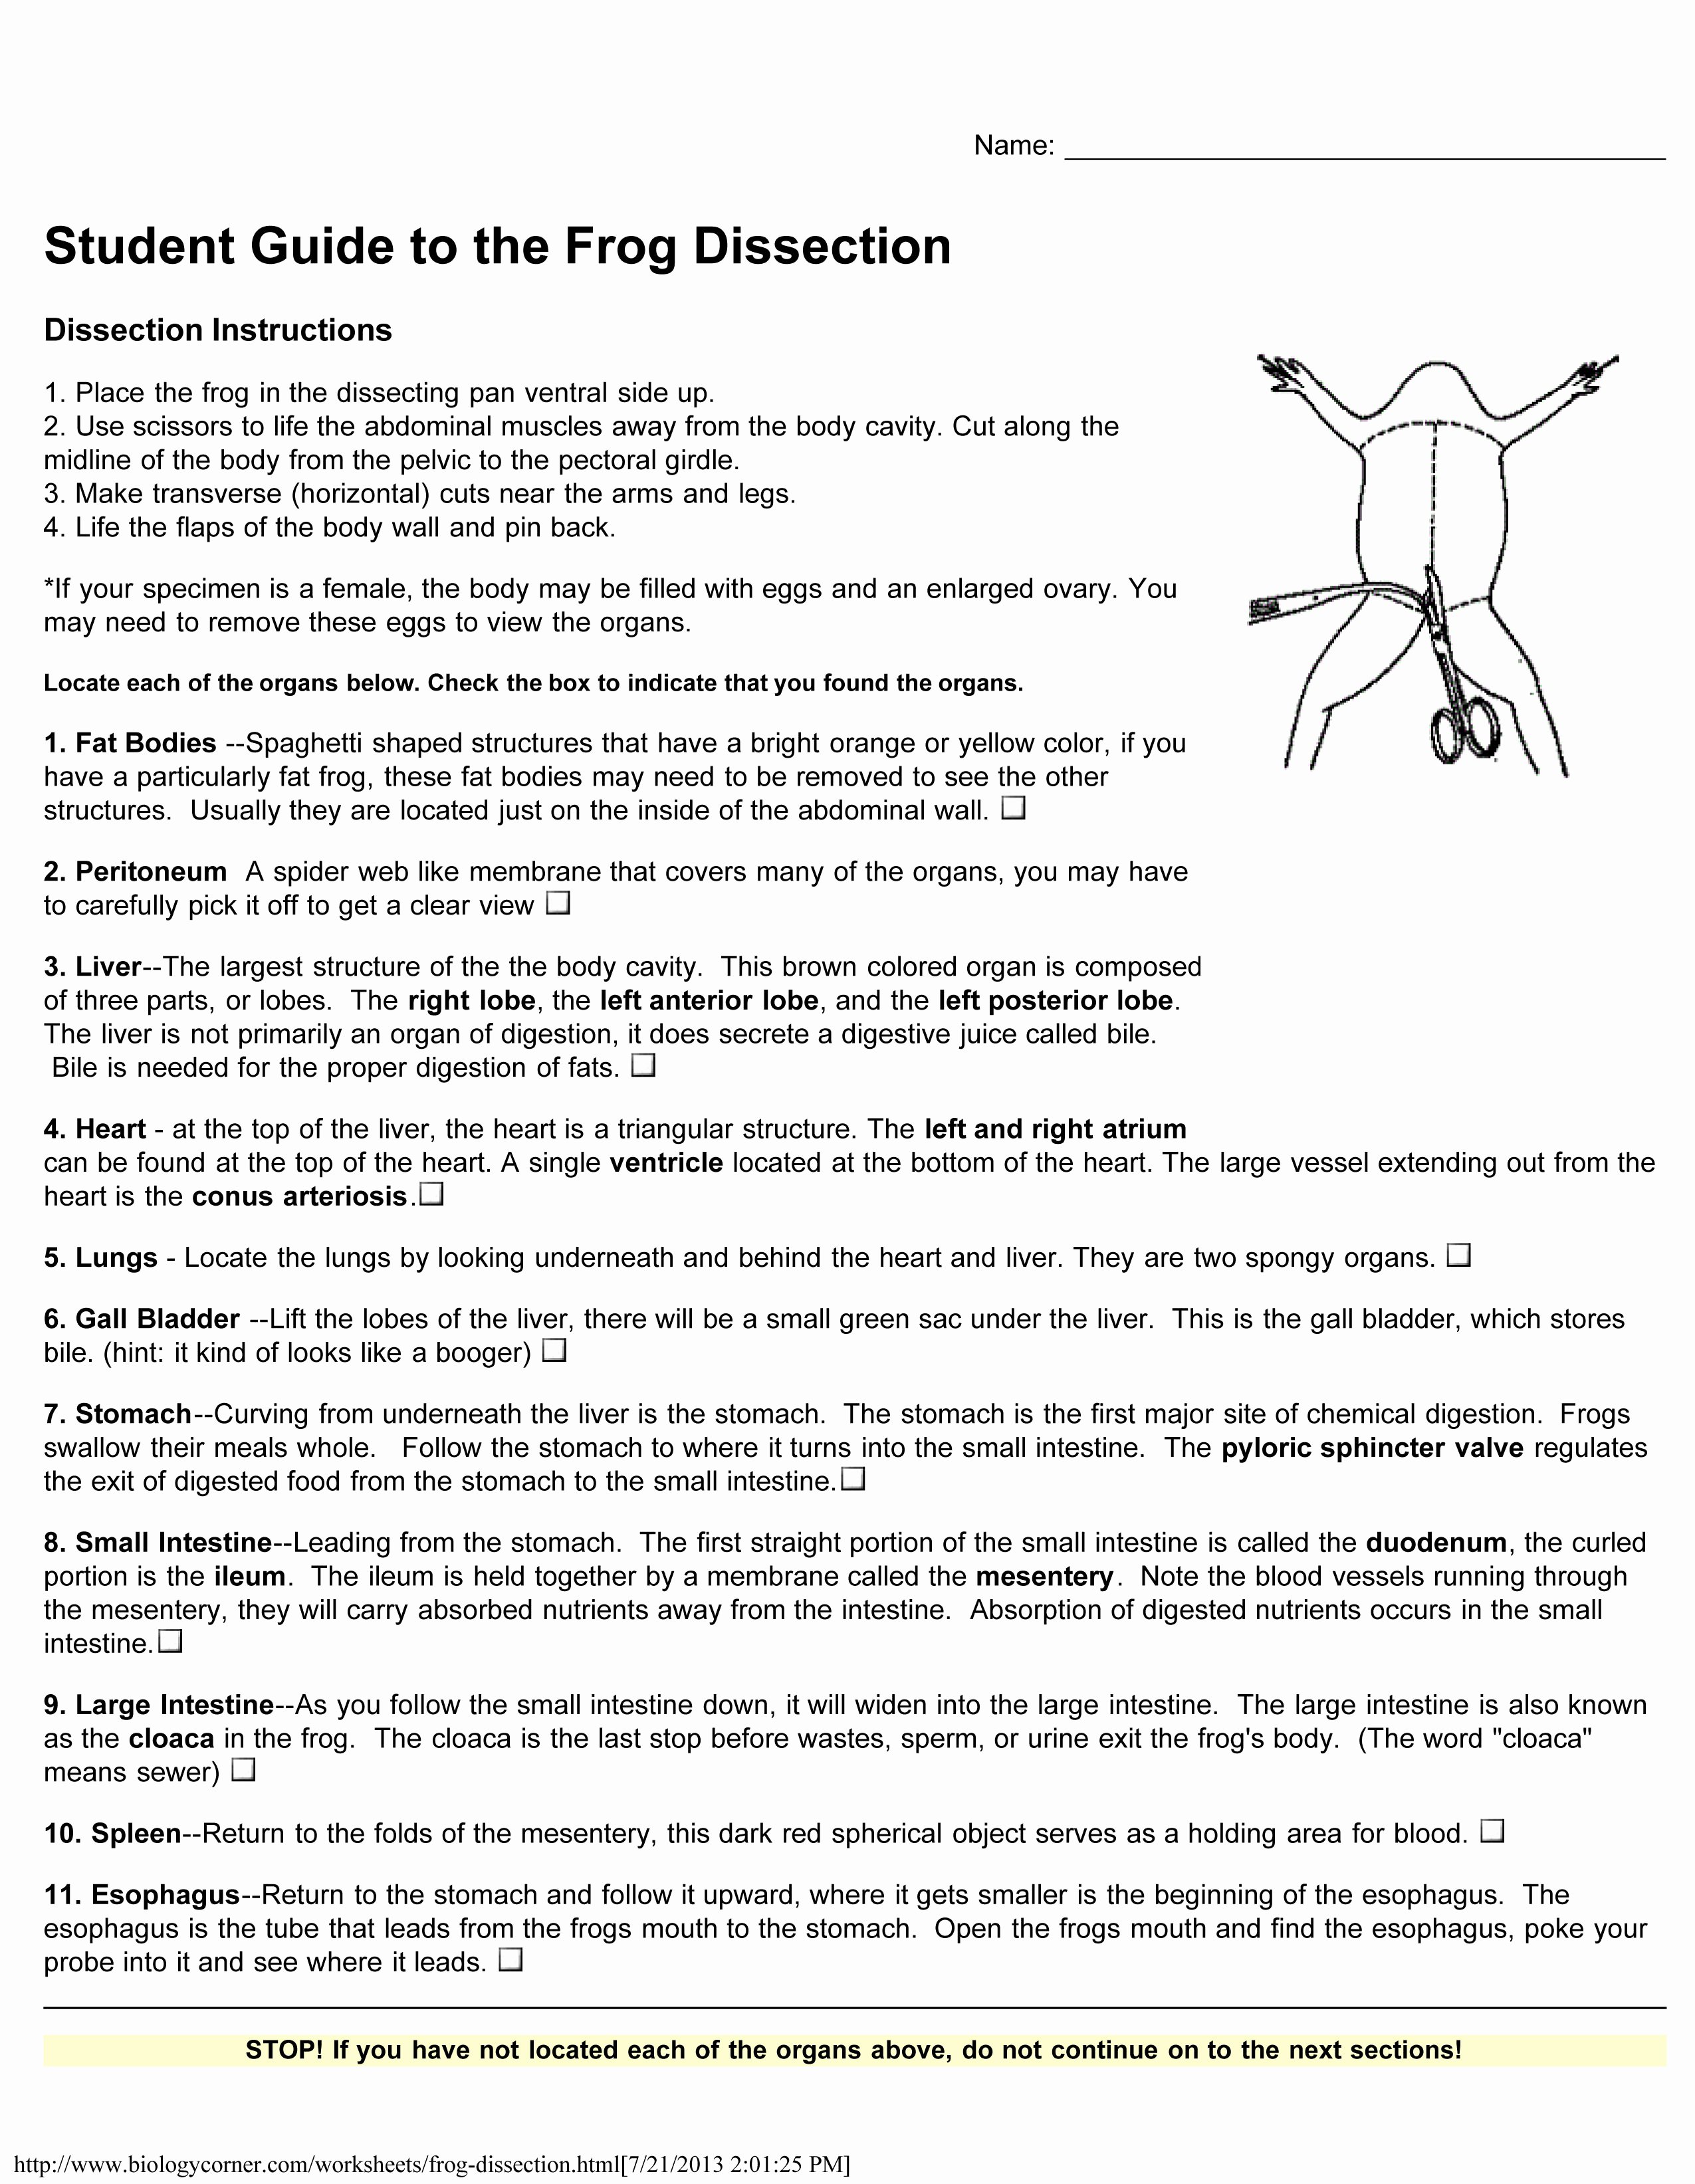 Frog Dissection Pre Lab Worksheet Unique Advance Preparation and Class Materials Walker Stem